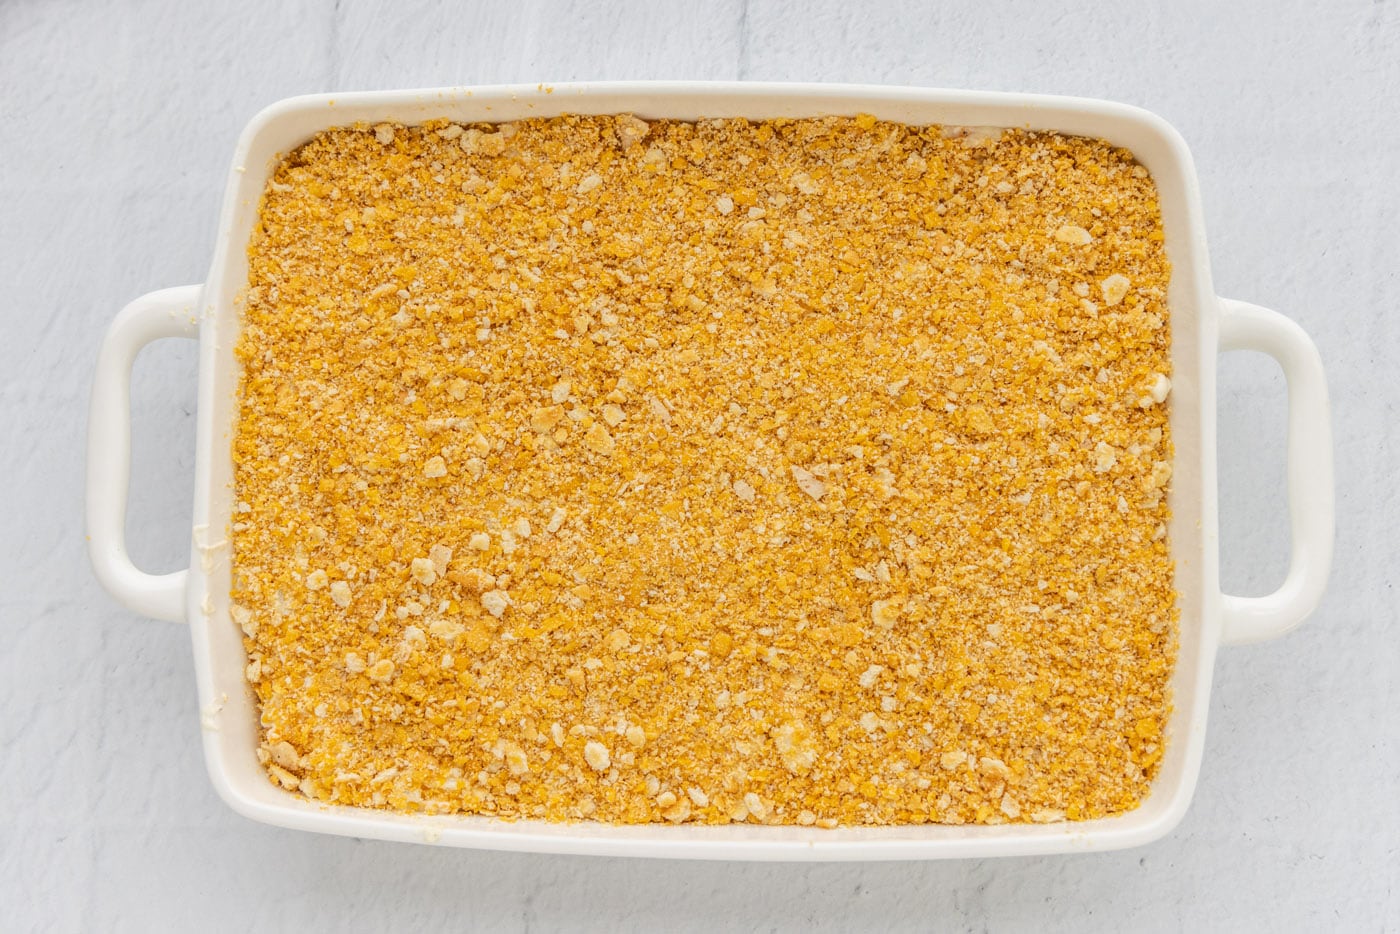 ritz and cornflake topping on funeral potatoes